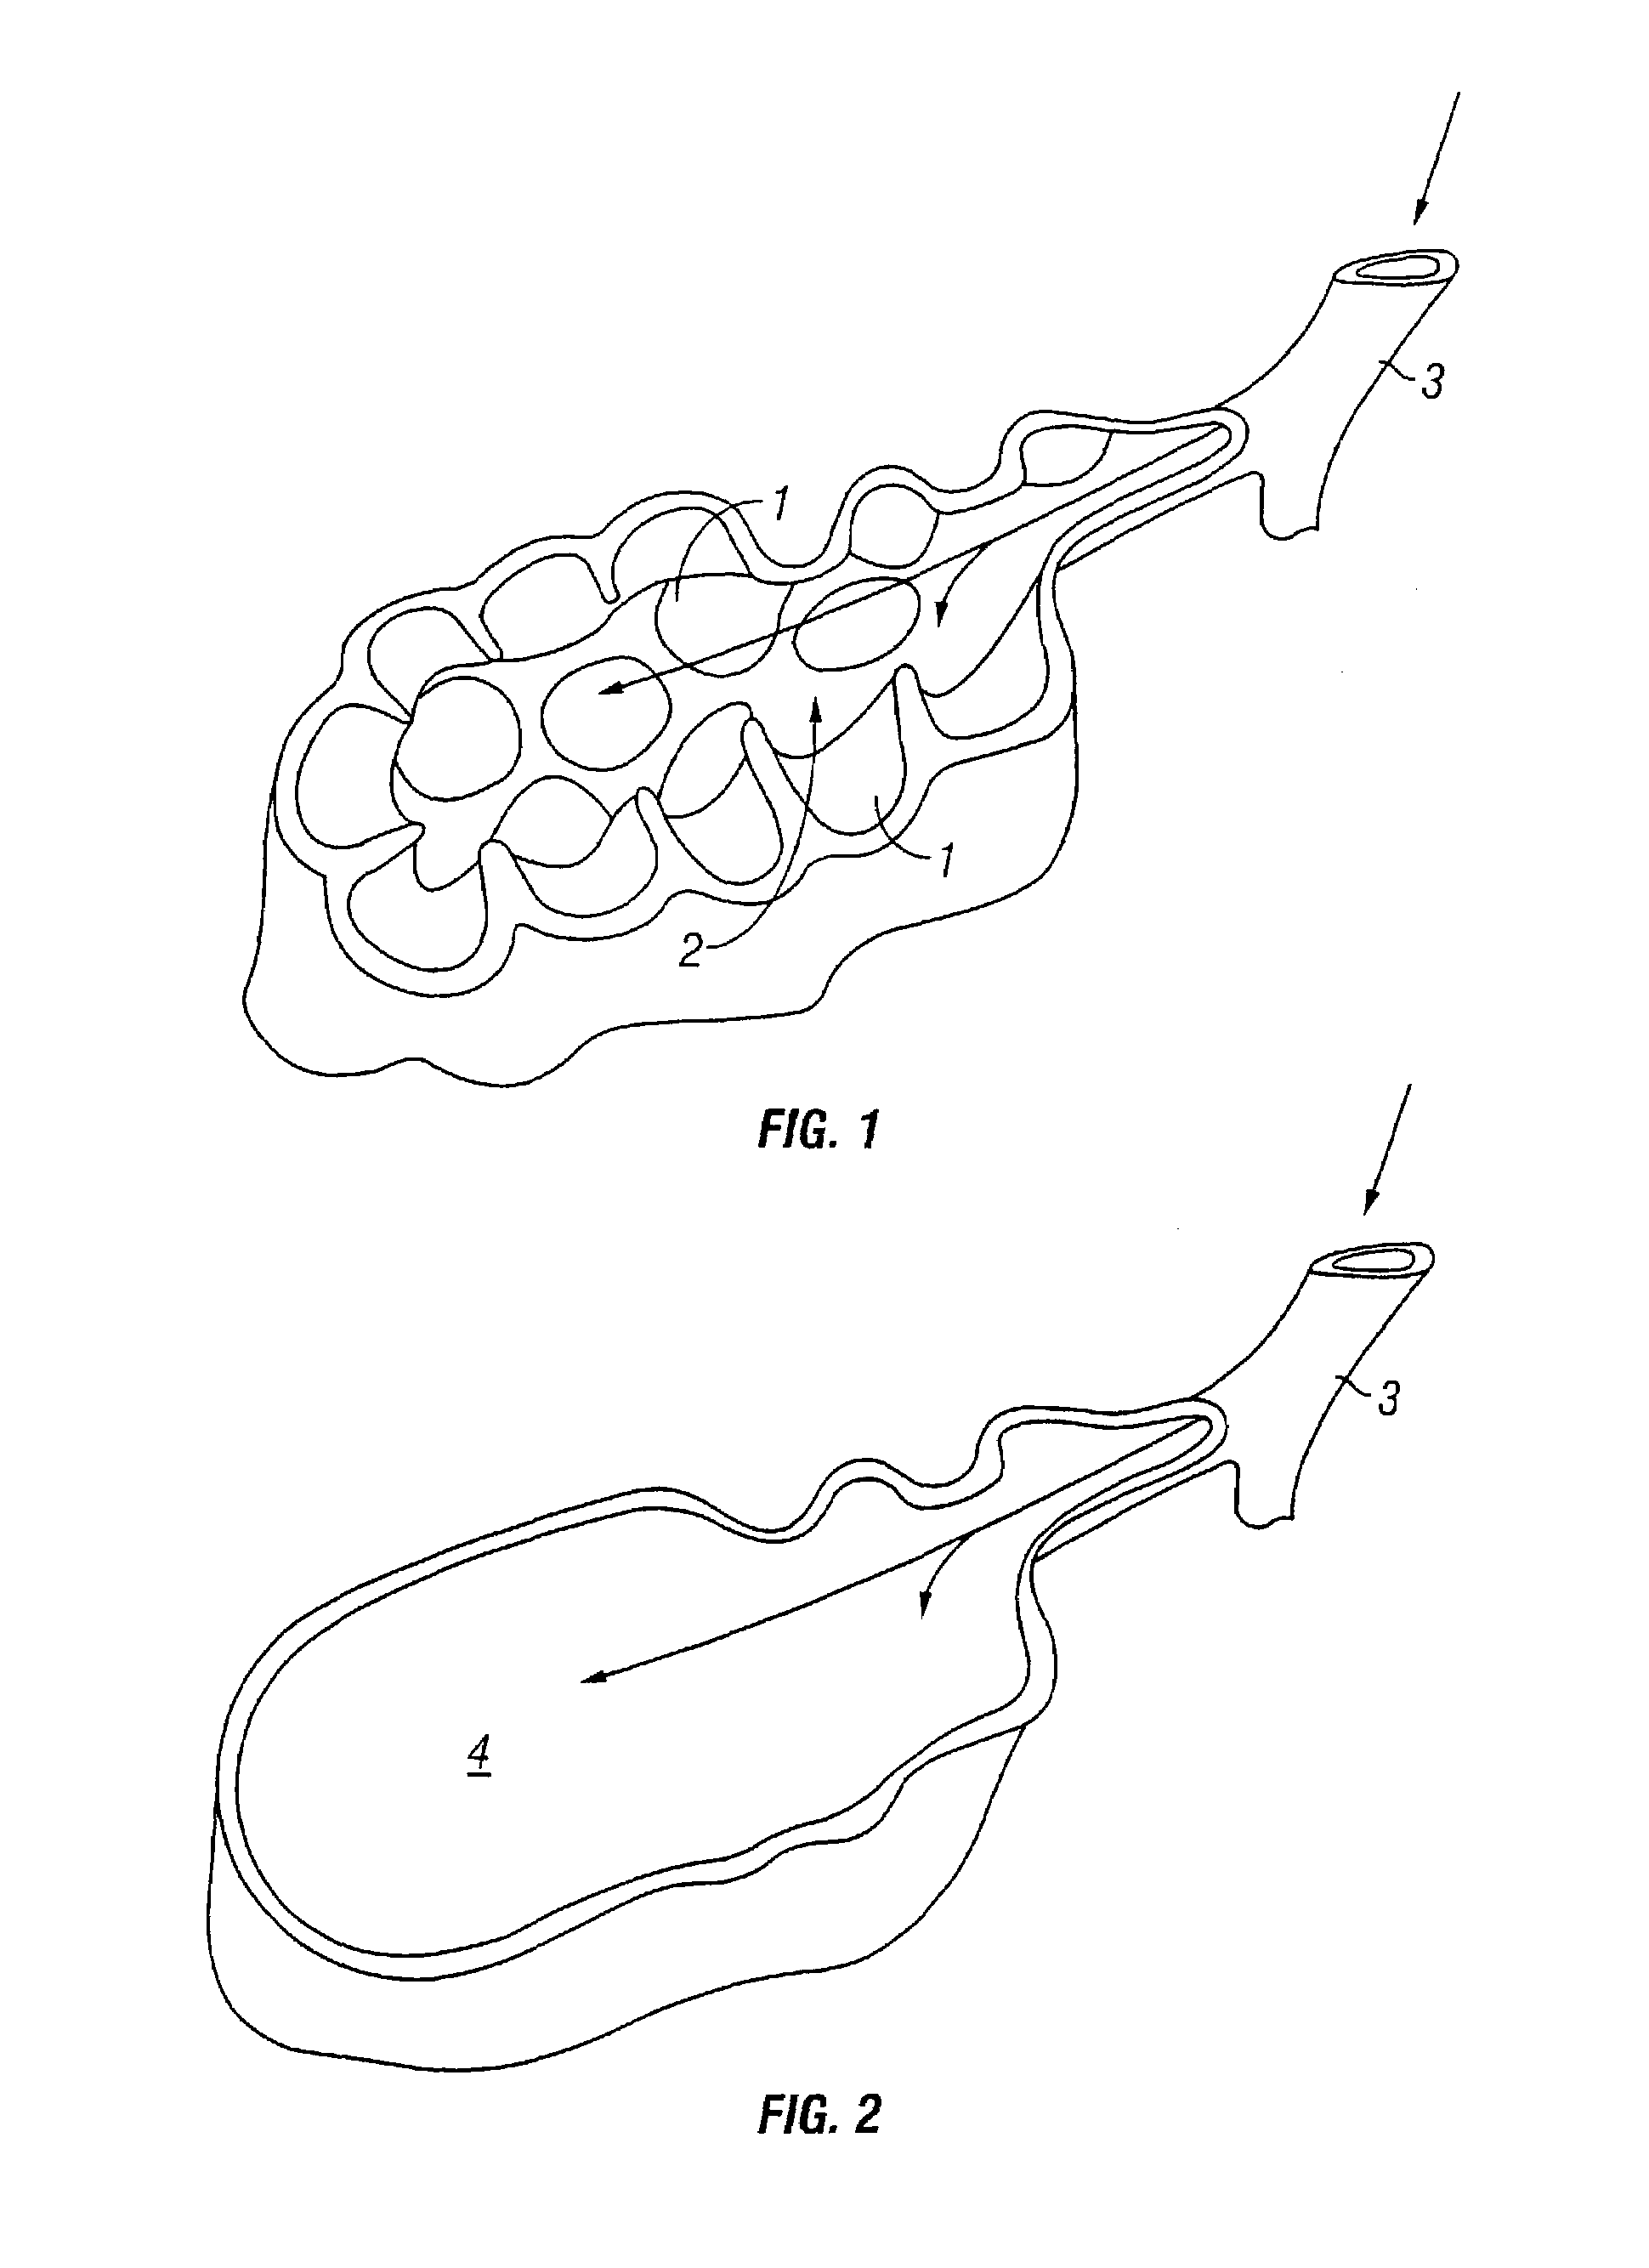 Method of increasing gas exchange of a lung